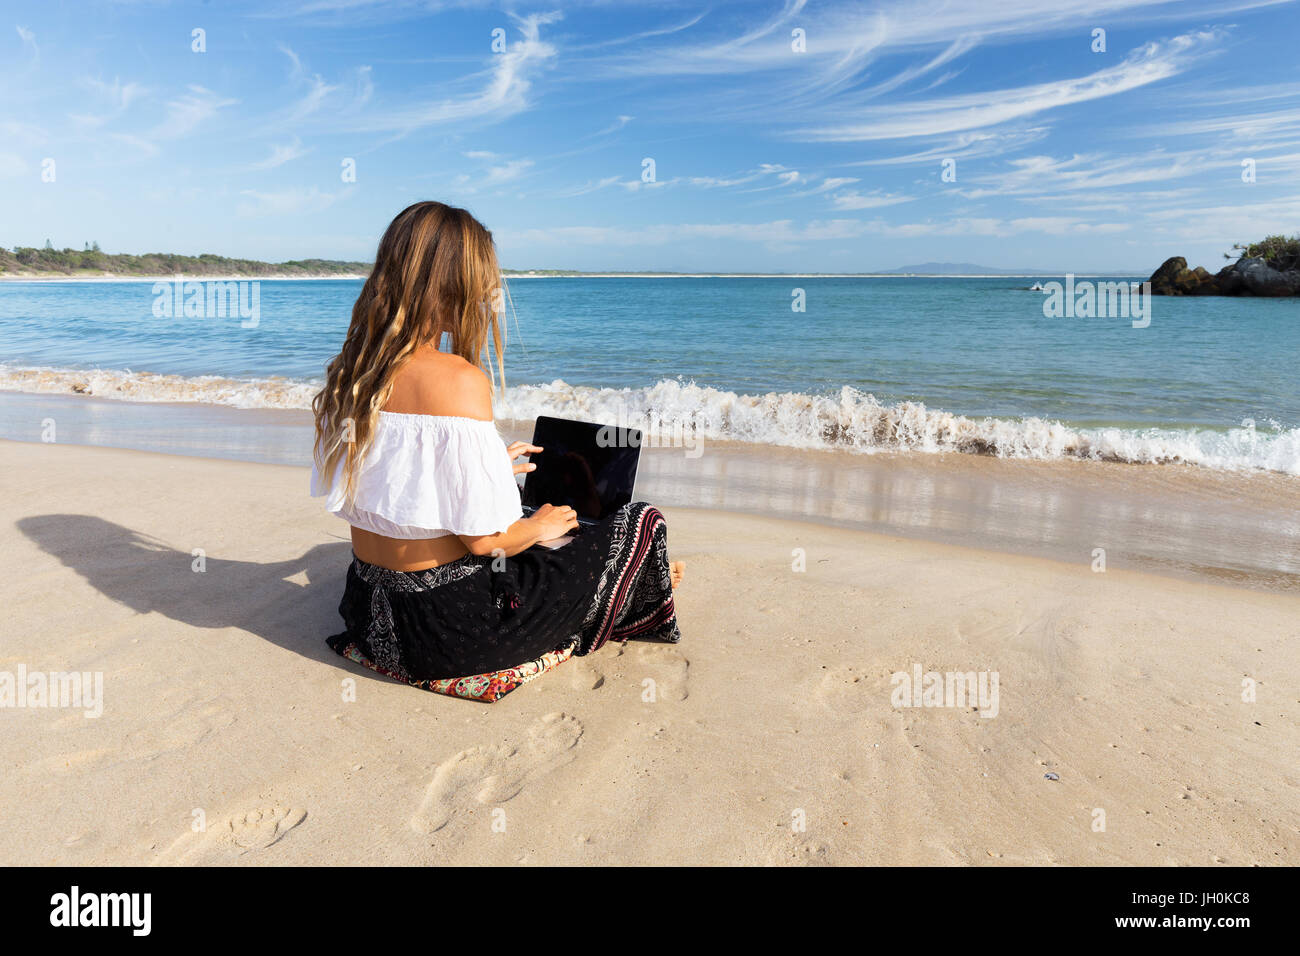 A beautiful young woman sits on the beach beside the sea and crashing waves while working on a laptop. Stock Photo